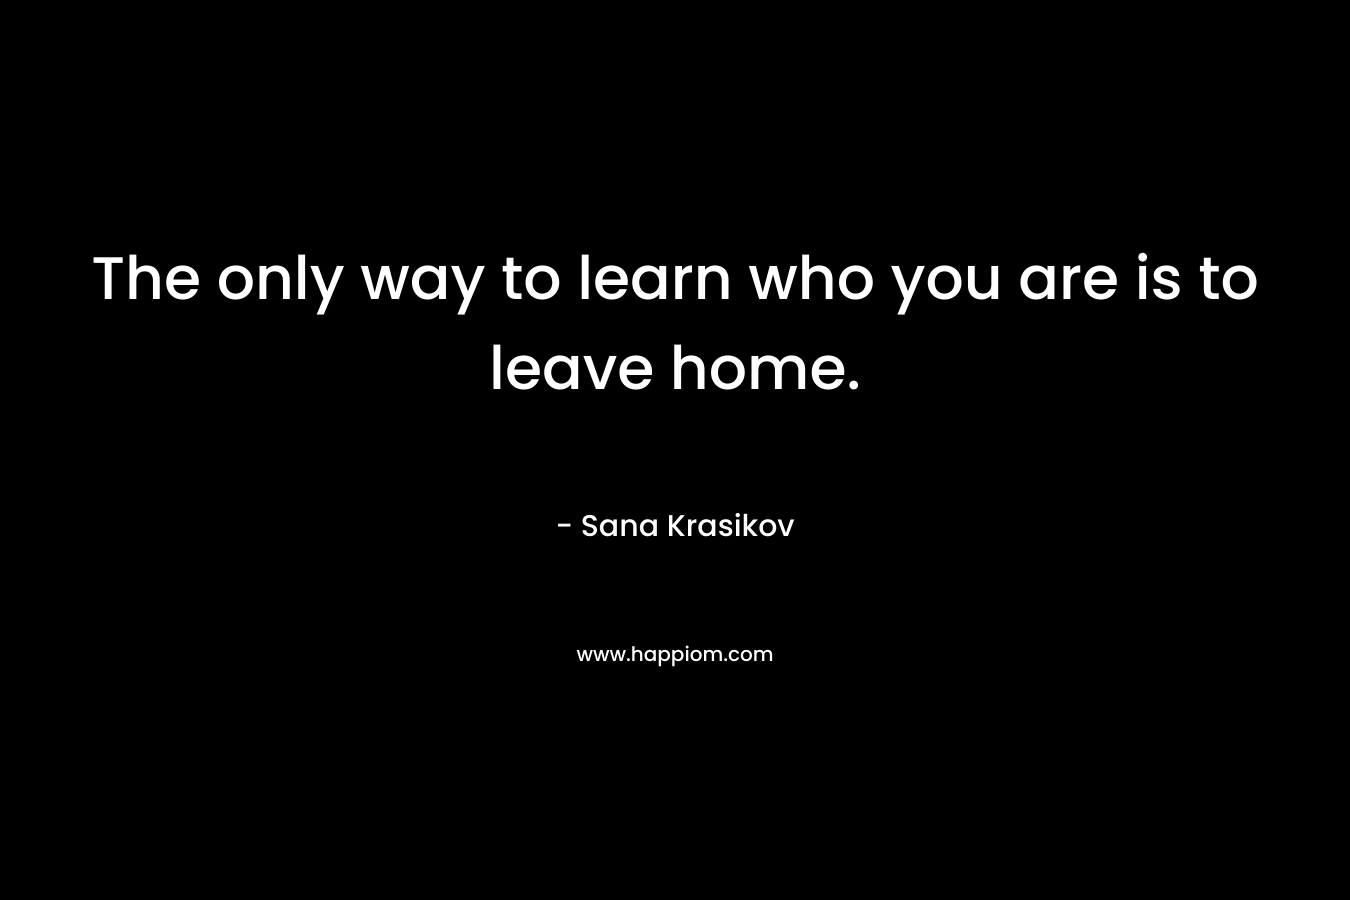 The only way to learn who you are is to leave home. – Sana Krasikov